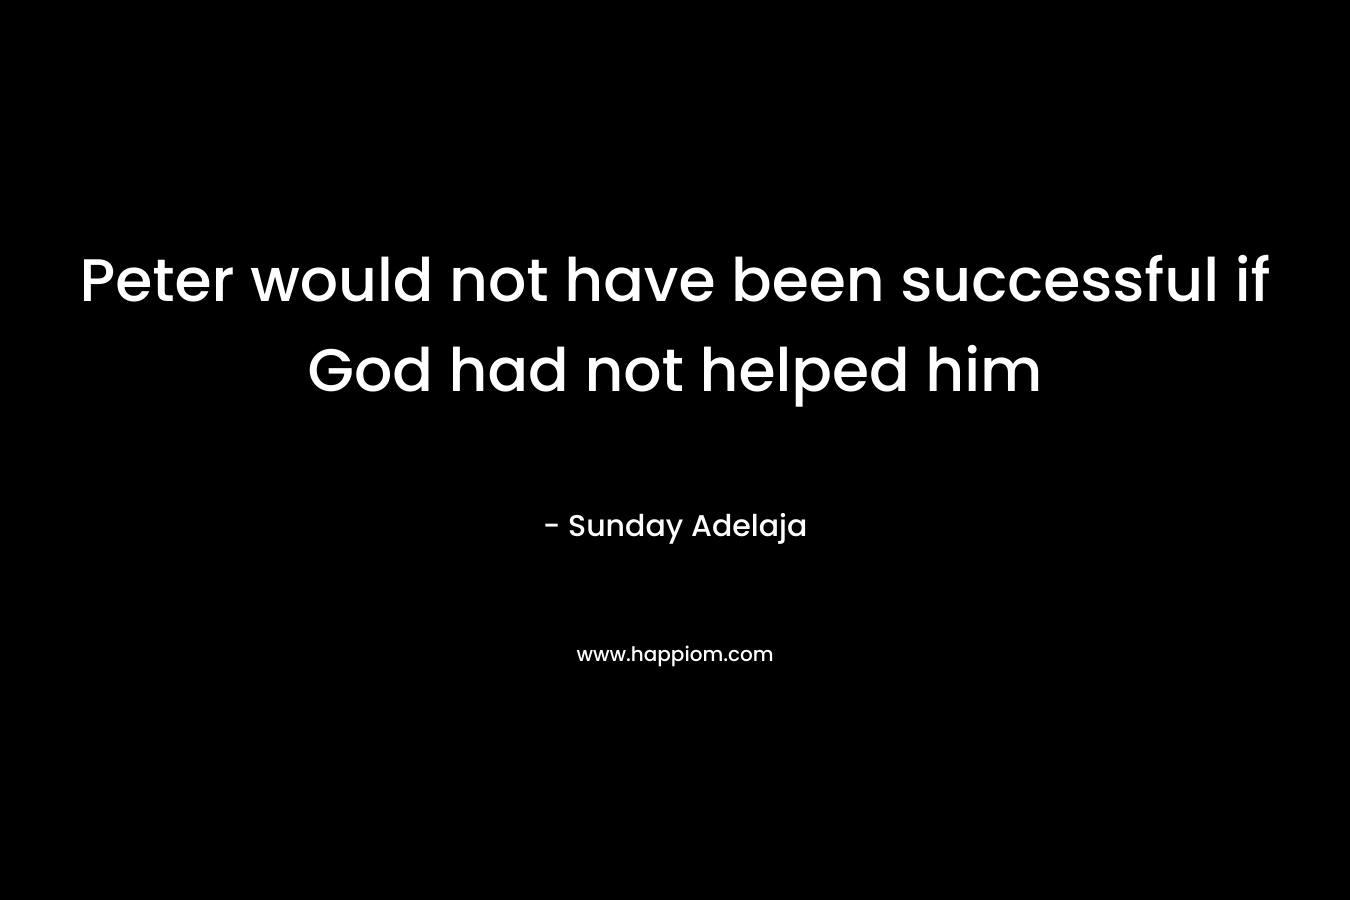 Peter would not have been successful if God had not helped him